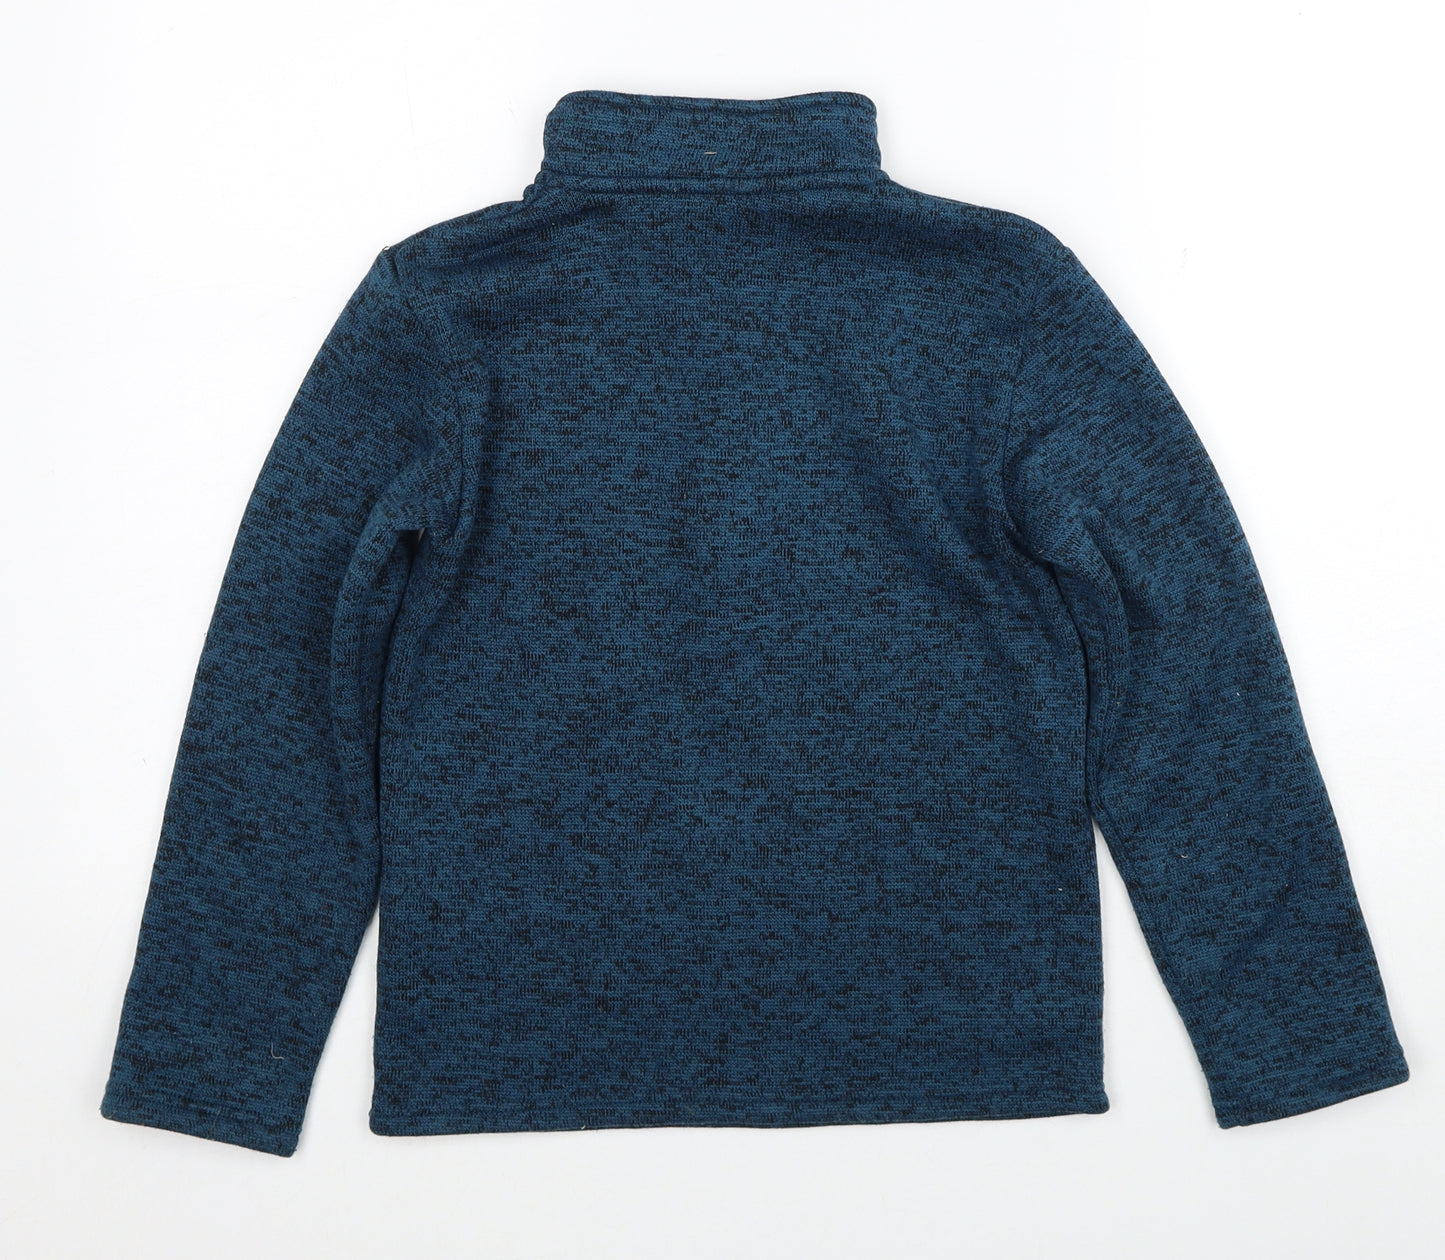 Hi Gear Boys Blue Polyester Pullover Sweatshirt Size 7-8 Years Pullover